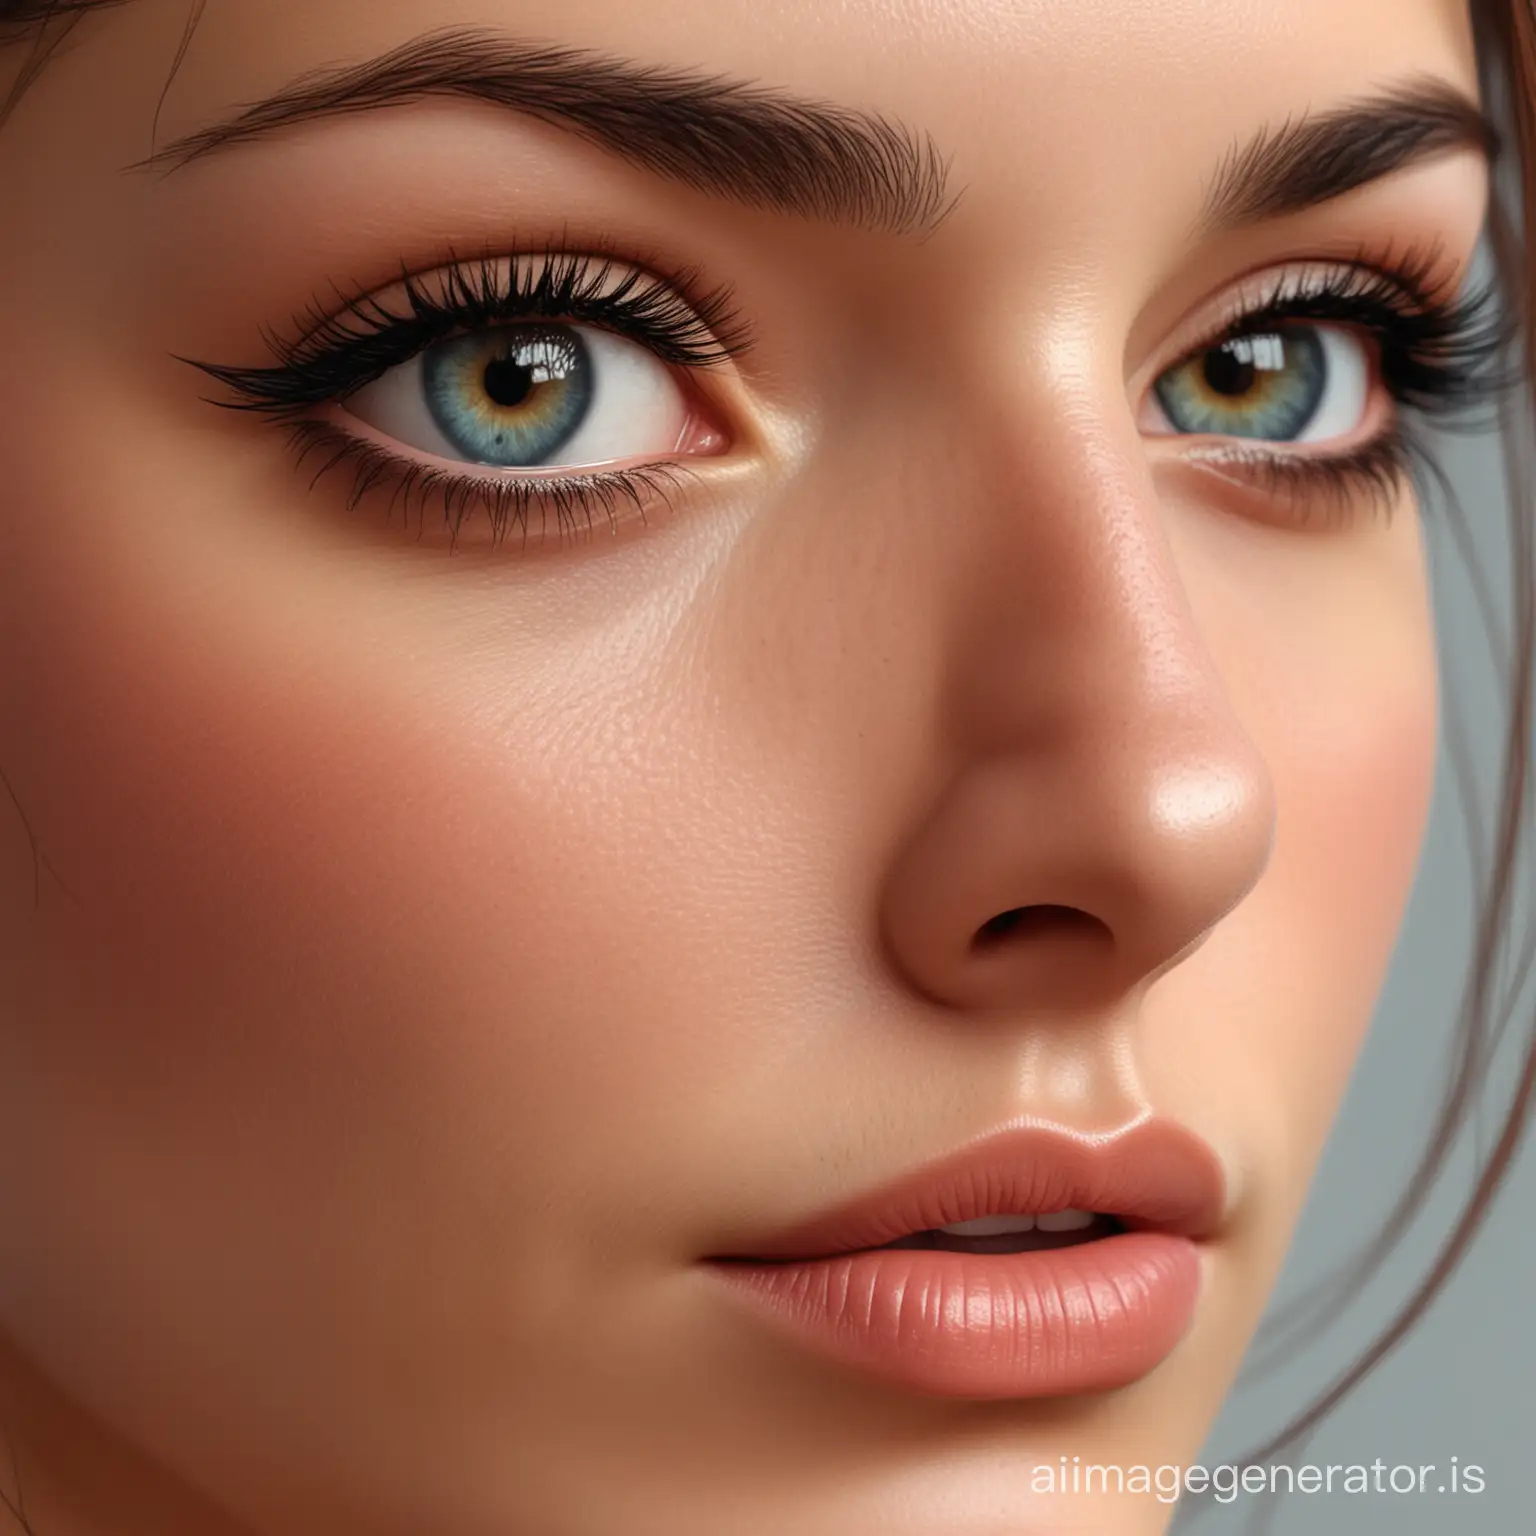 Realistic-Portrait-of-a-Beautiful-Woman-Staring-Directly-with-Captivating-Eyes